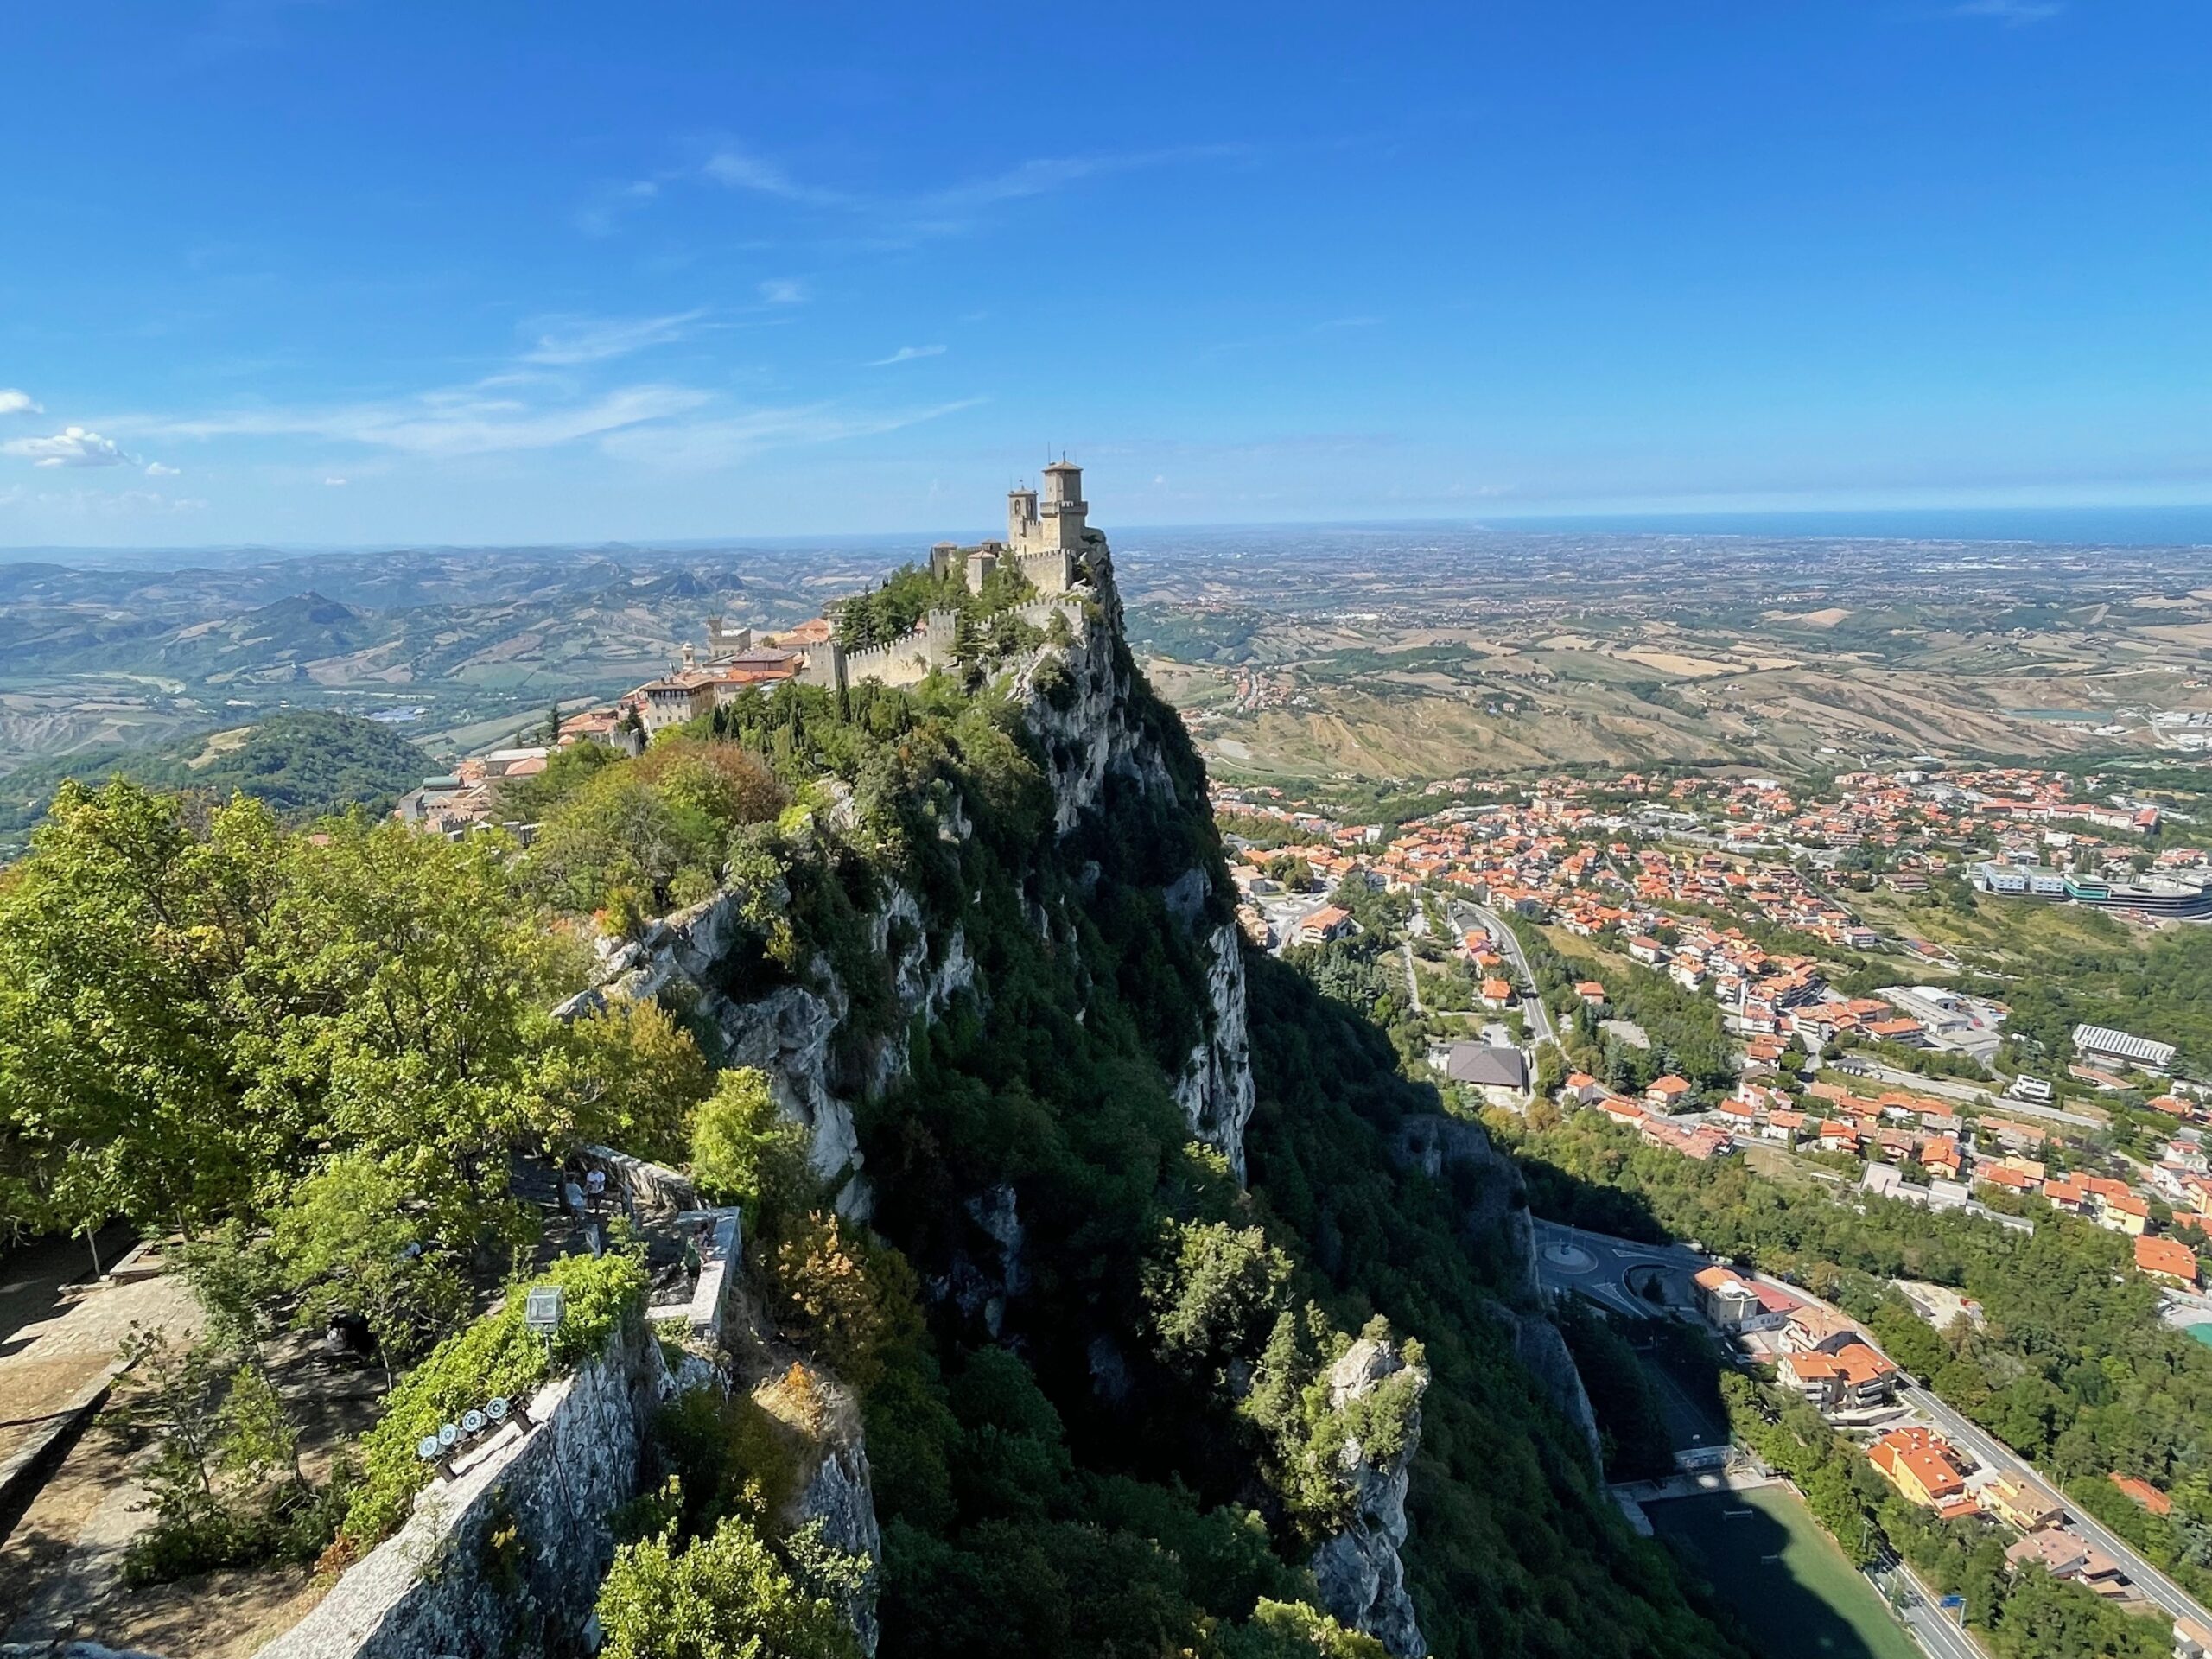 What to see and do in San Marino? One day visit.